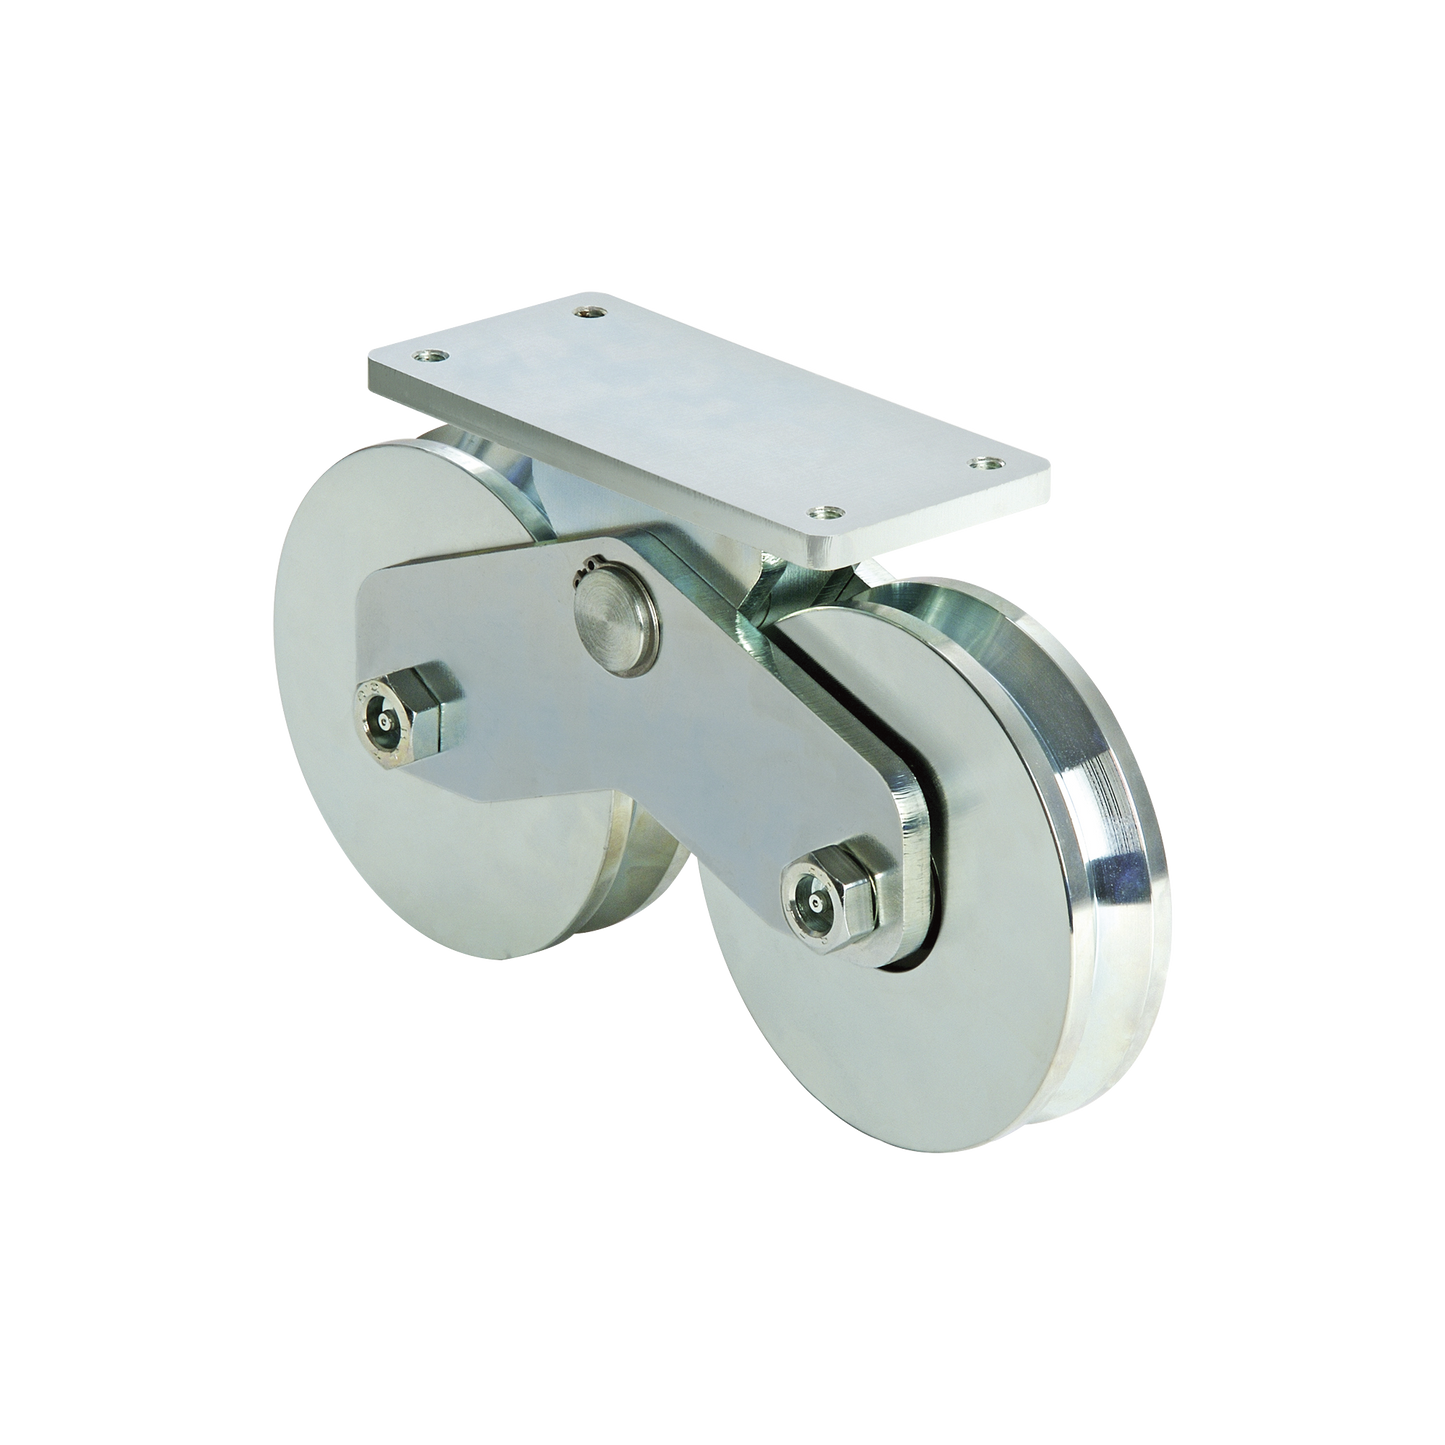 (339V-160) - 6" Twin Wheel V-Groove Surface Mount / Capacity For Doors up to 4230 lb (1920 Kg) / 2 Bearings / W/Grease Zerk / Galvanized